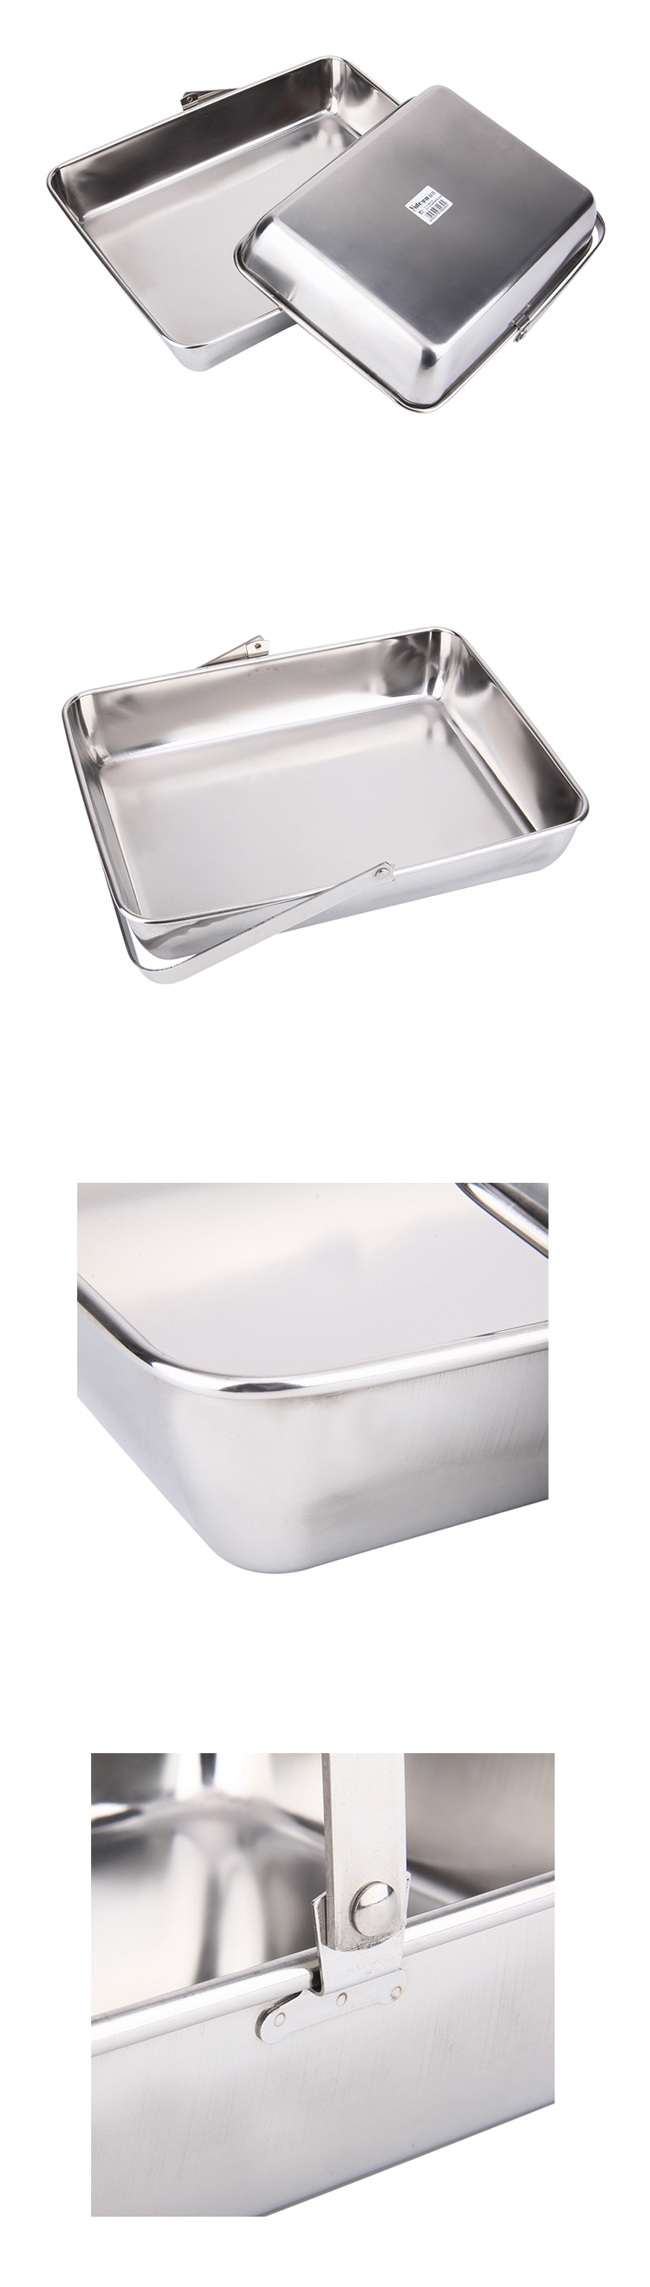 Wholesale Hotel Supplies Stainless Steel Portable Dish Towel & Serving Tray